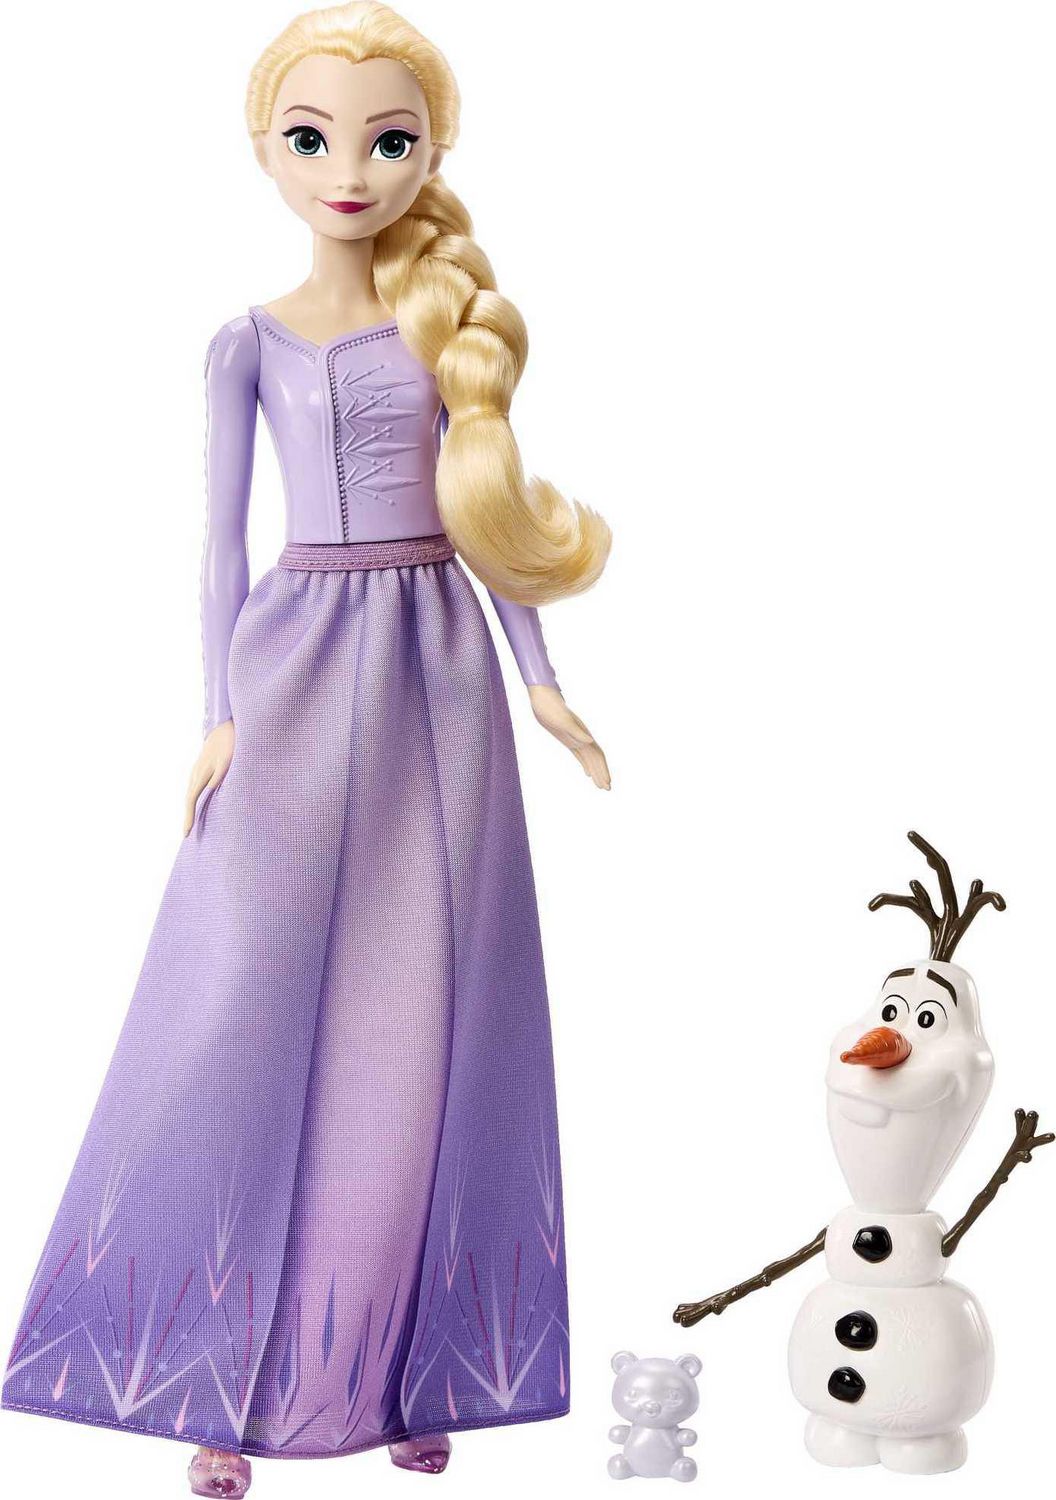 Disney Frozen Toys, Elsa Fashion Doll and Olaf Figure, Ages 3+